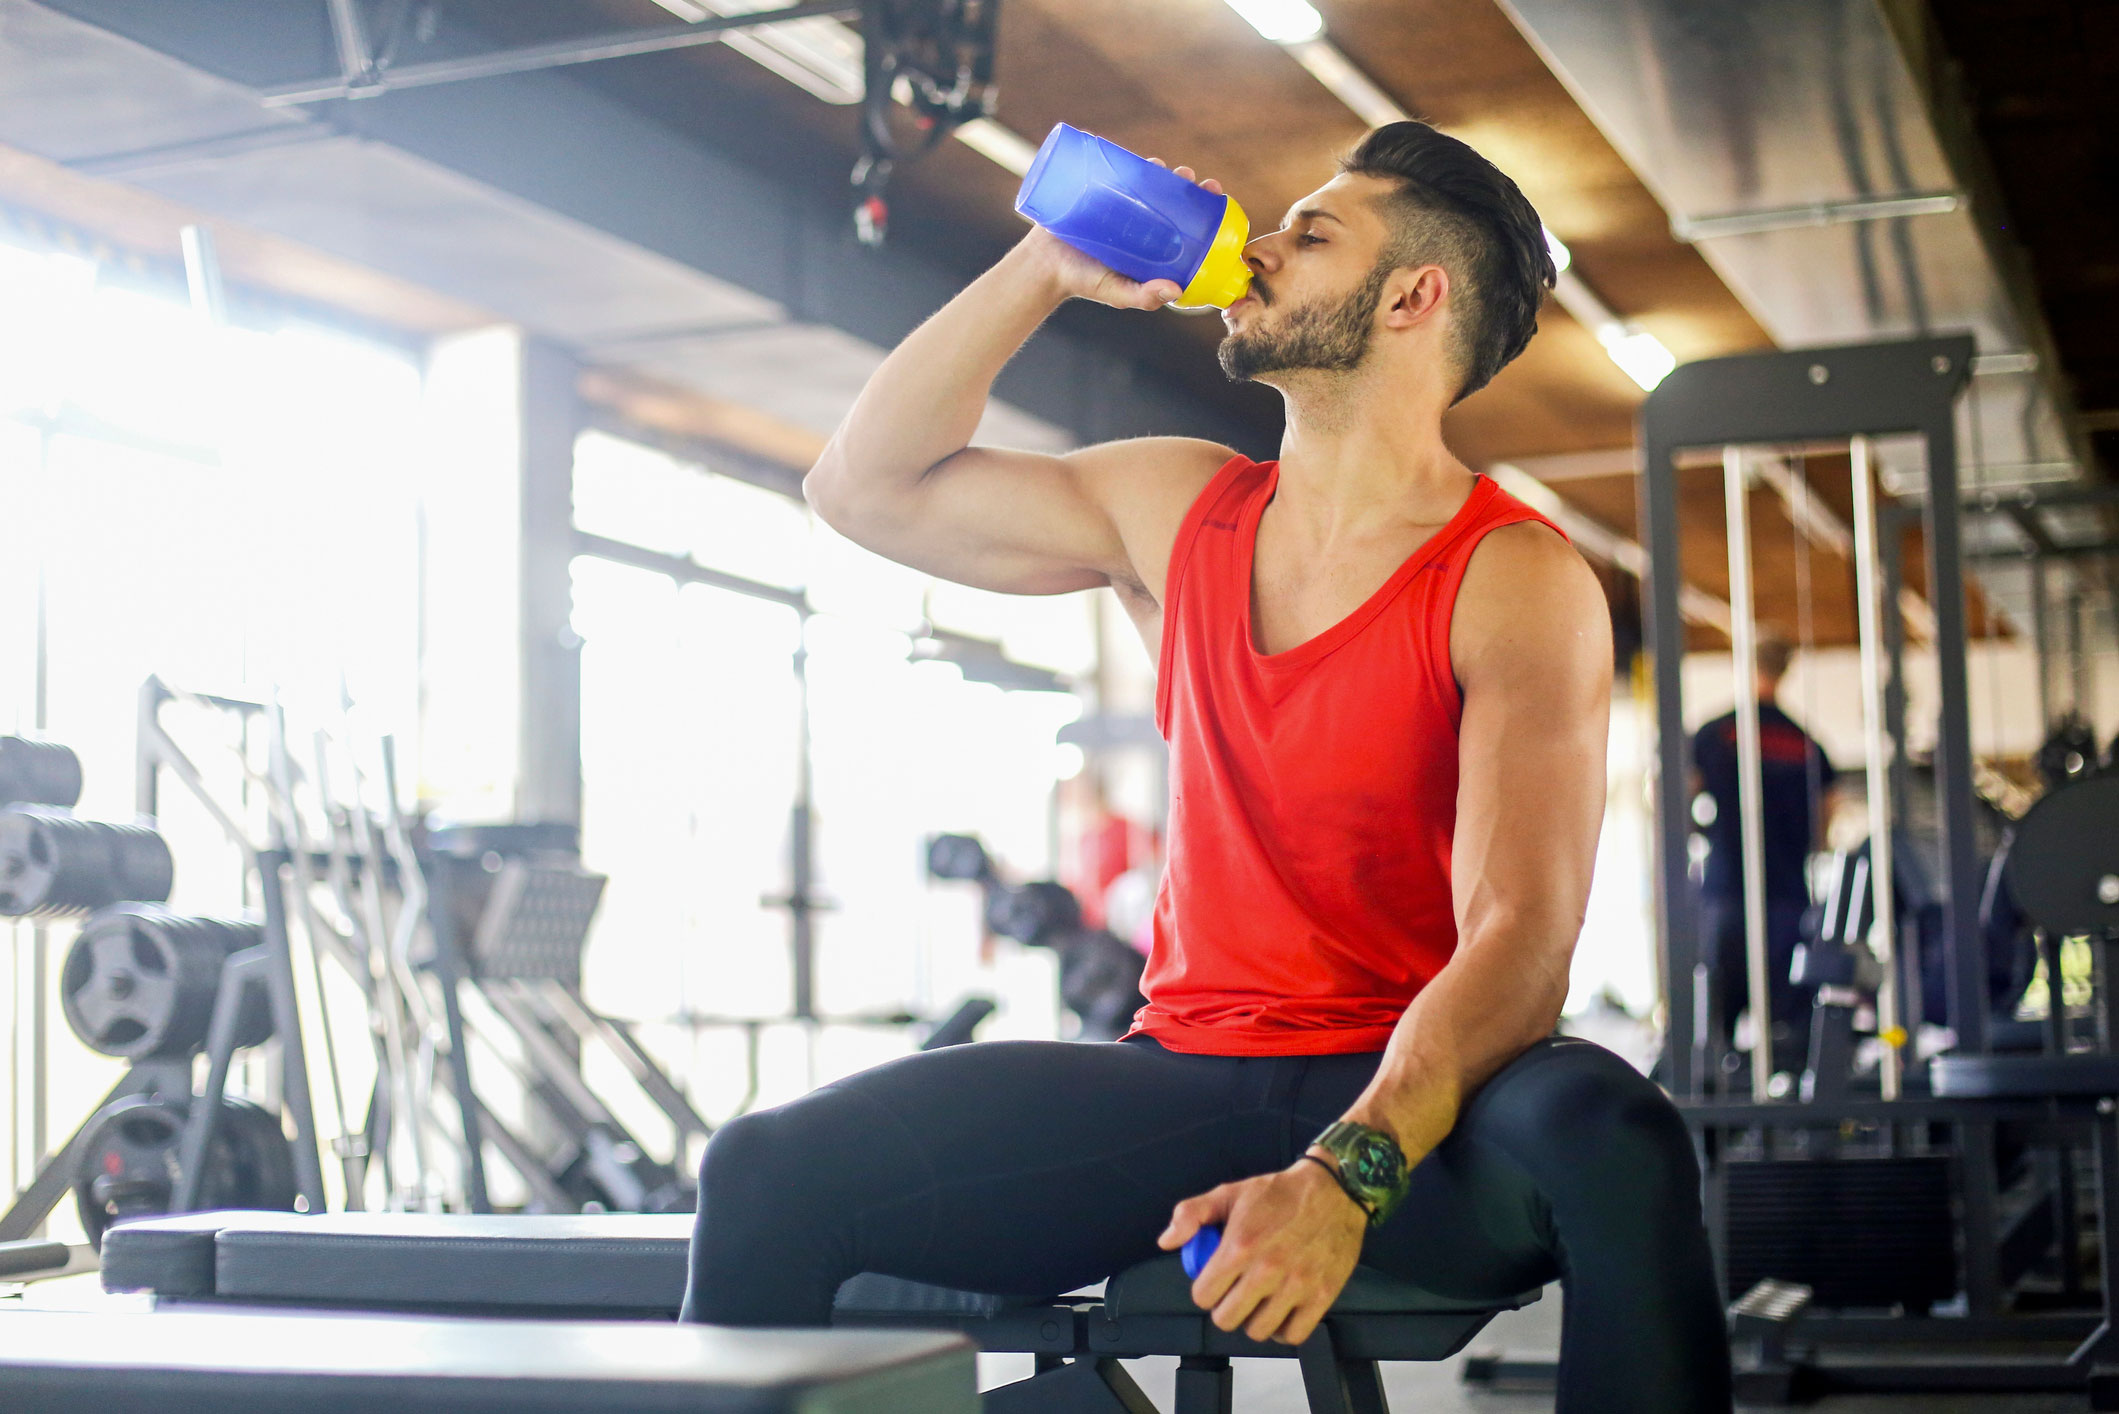 Drinking Protein Shakes After Exercise for Weight Loss